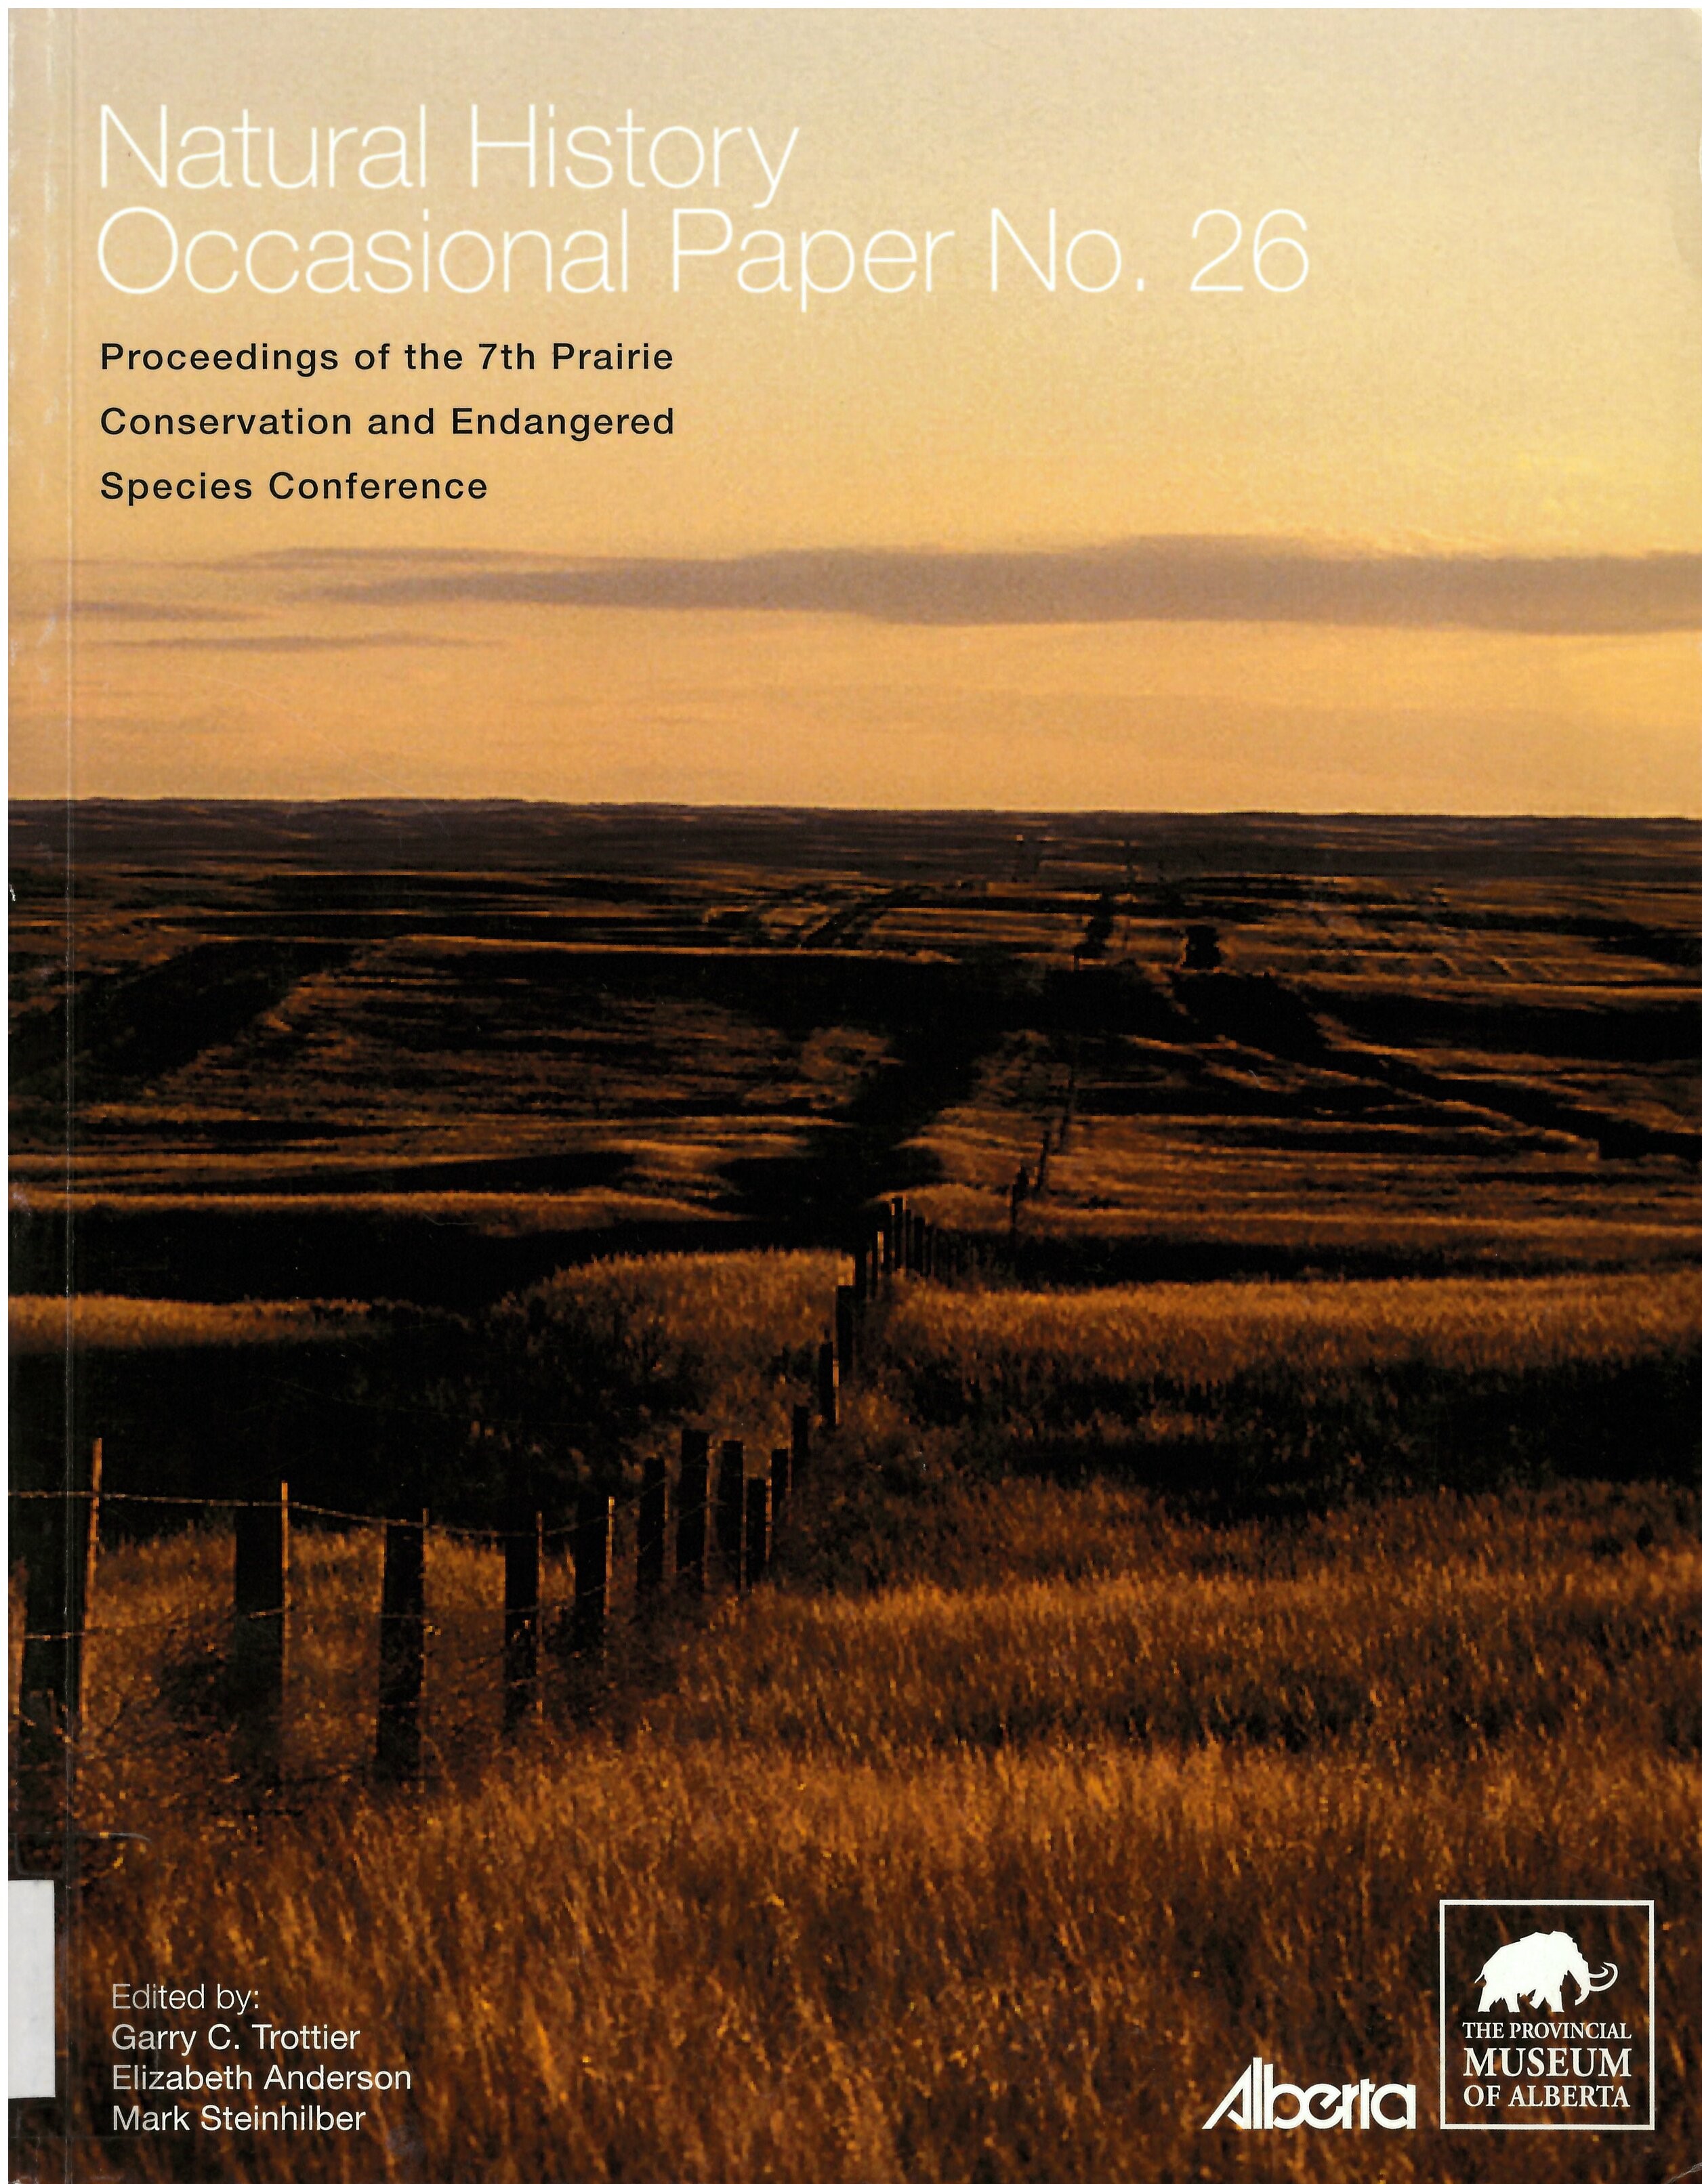 Proceedings of the 7th Prairie Conservation and Endangered Species Conference, February 2004 at Calgary, Alberta